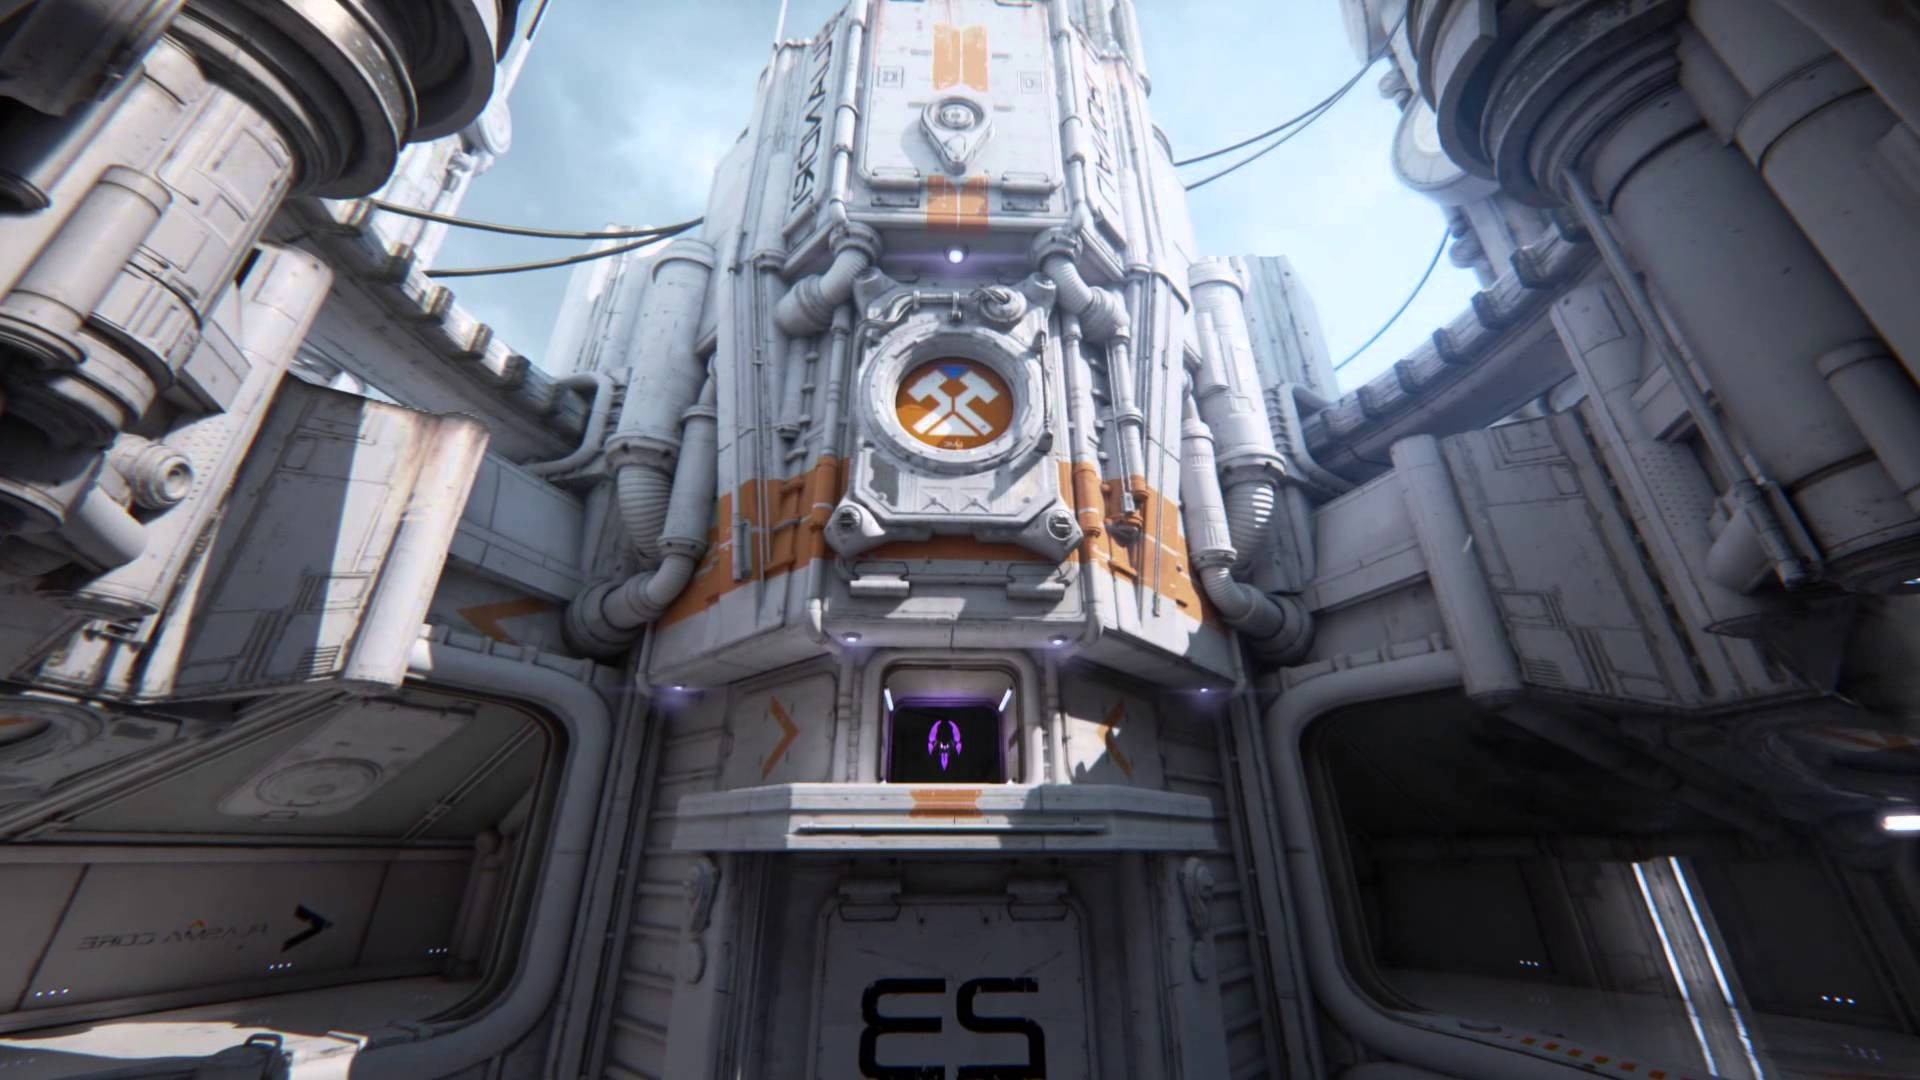 Unreal Engine 4 Unreal Tournament Video Games Wallpapers Hd Images, Photos, Reviews